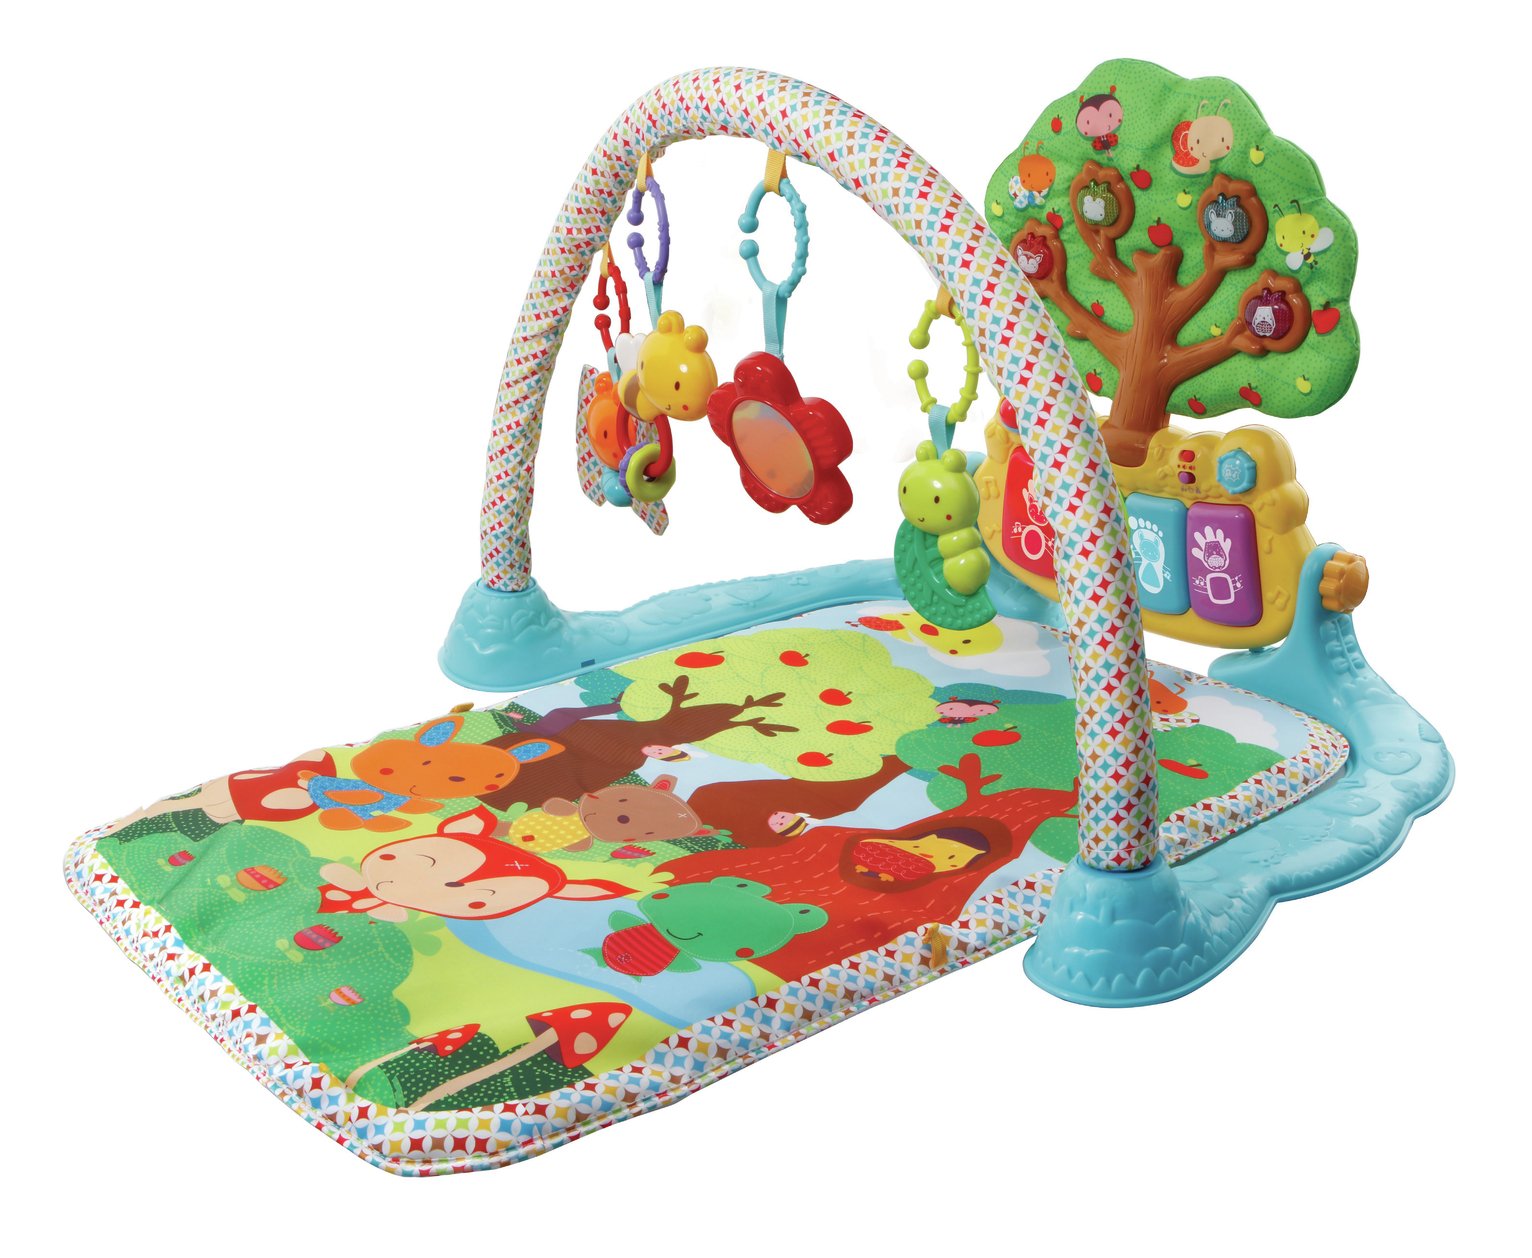 glow and giggle playmat